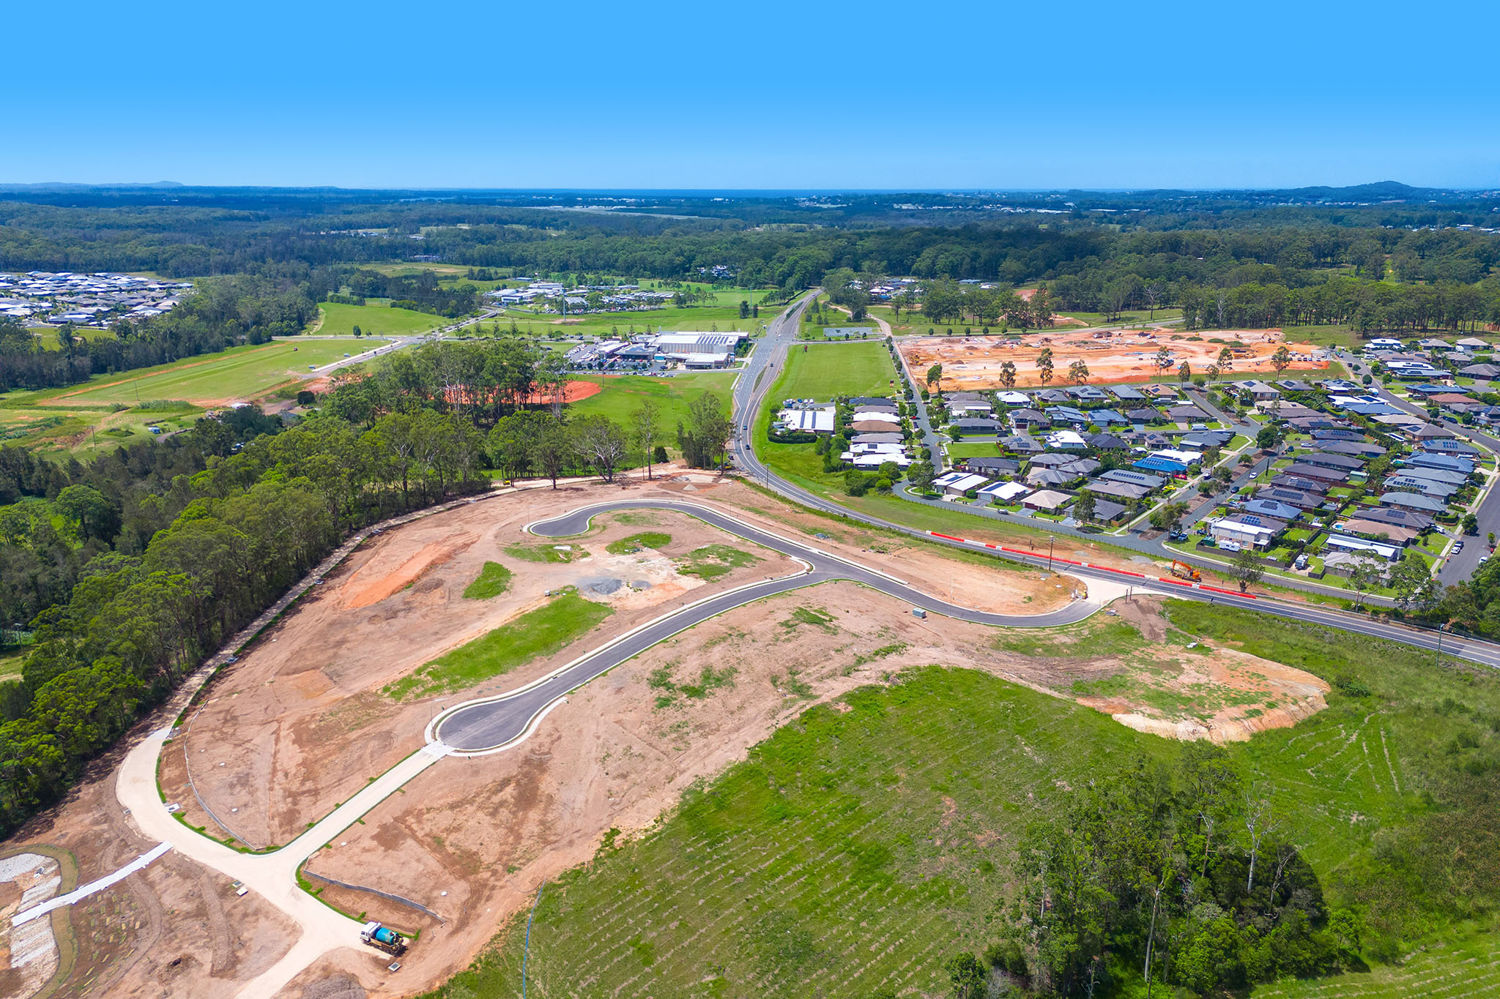 DISCOVER YOUR DREAM HOME SITE AT THE GATEWAY ESTATE